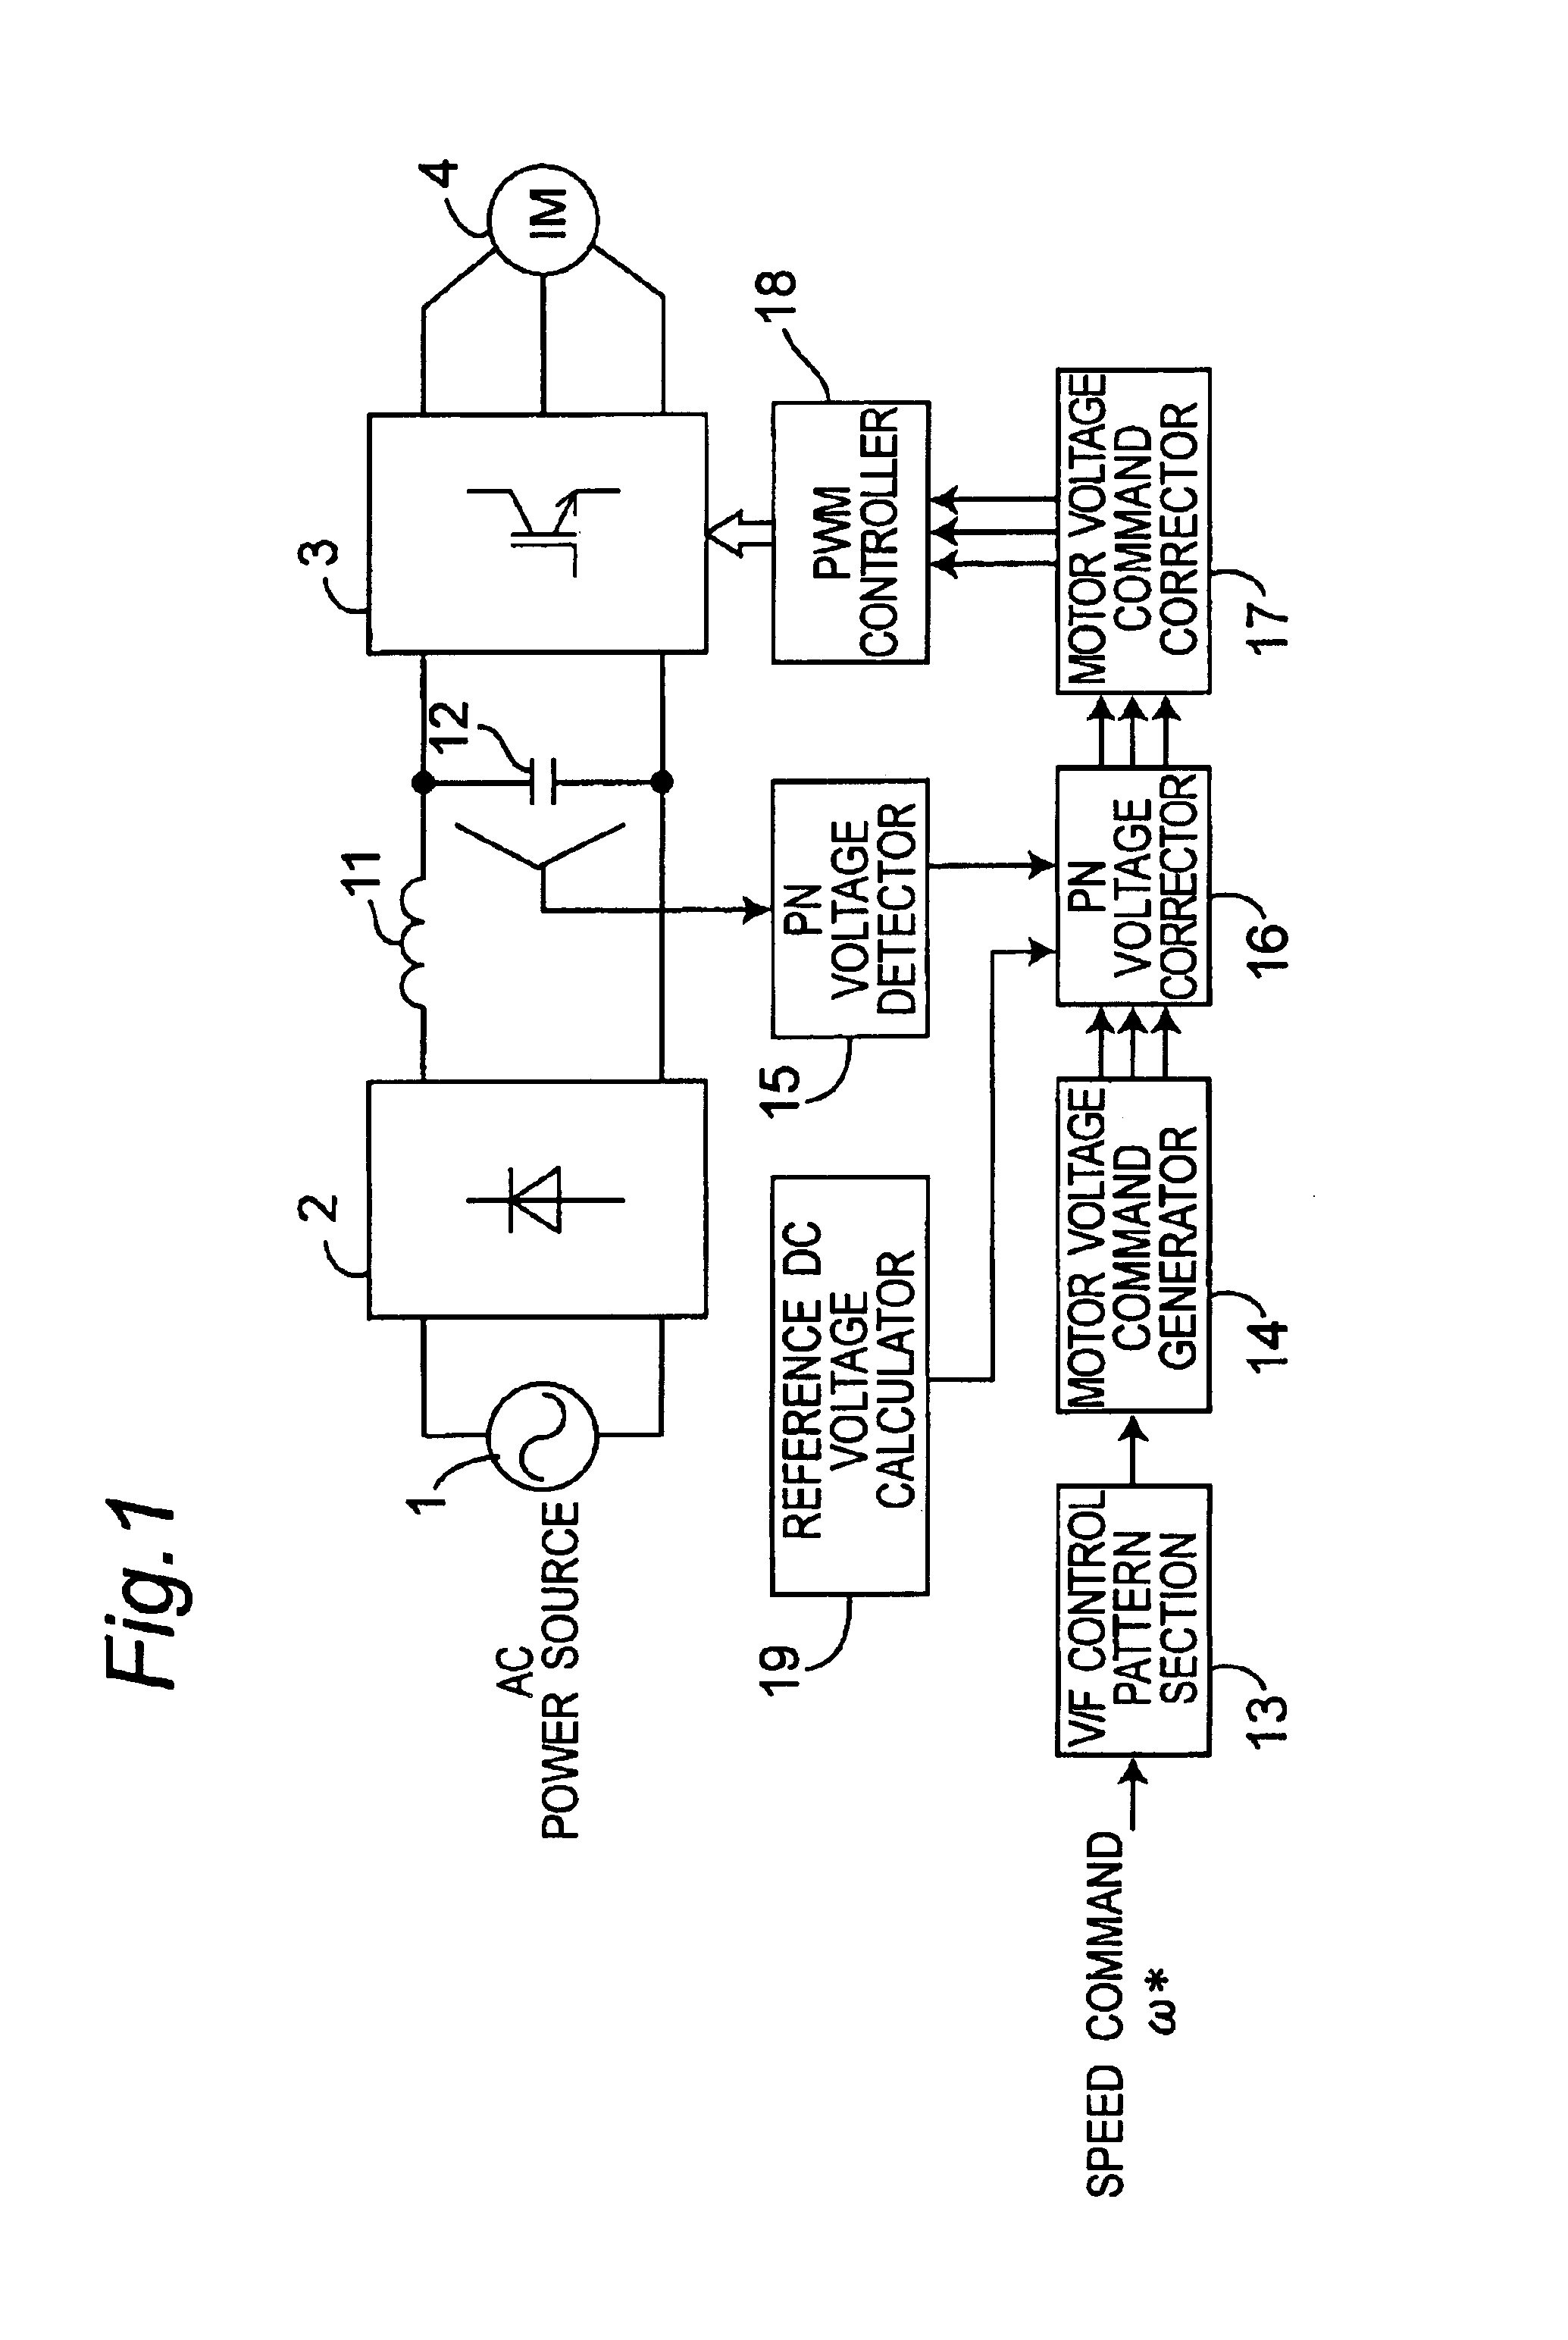 Inverter control device for driving a motor and an air conditioner